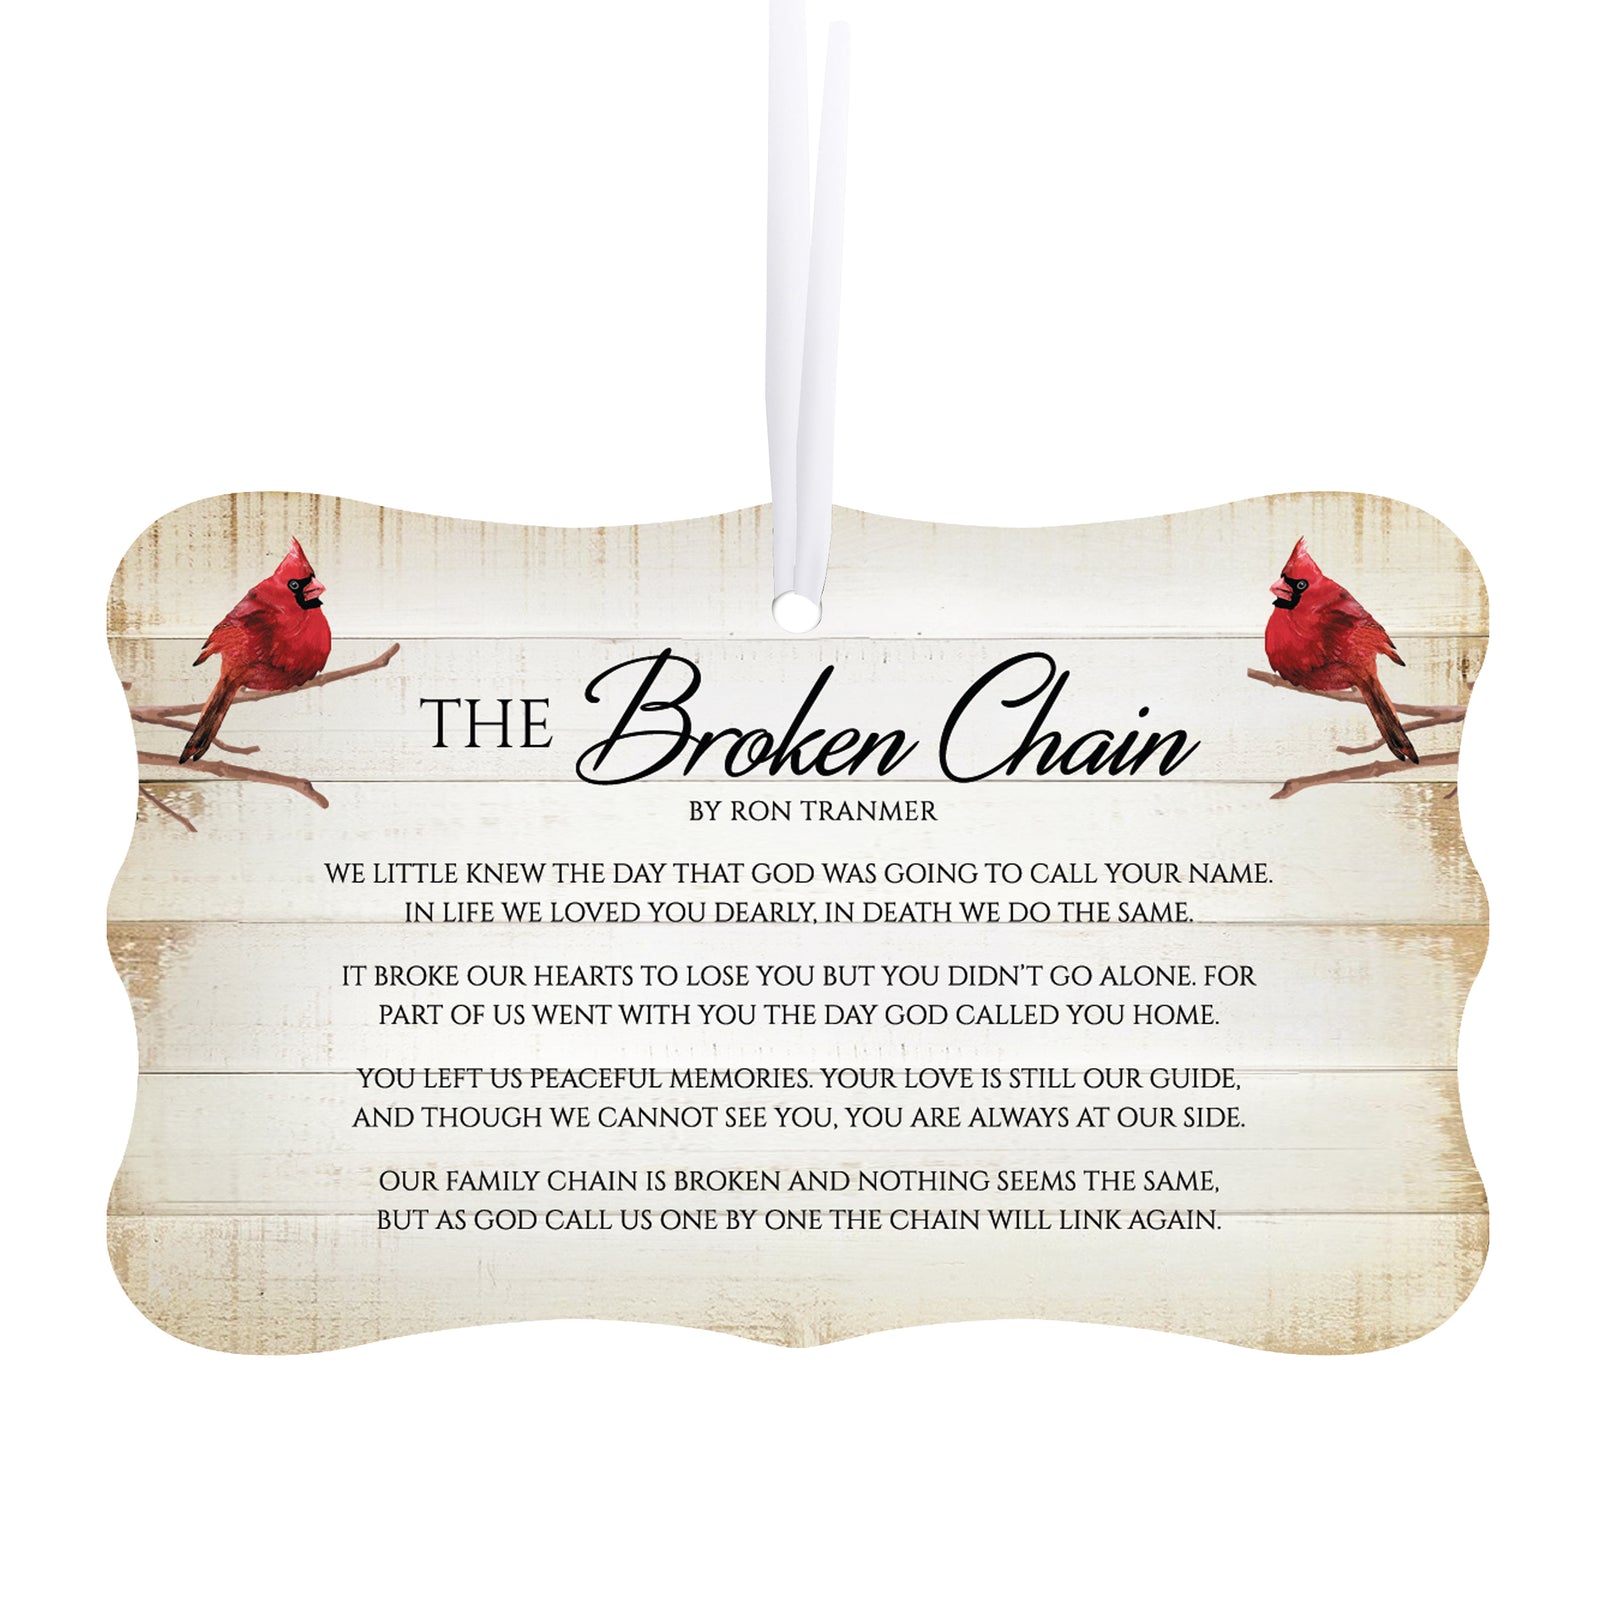 Rustic Scalloped Cardinal Wooden Ornament With Everyday Verses Gift Ideas - The Broken Chain